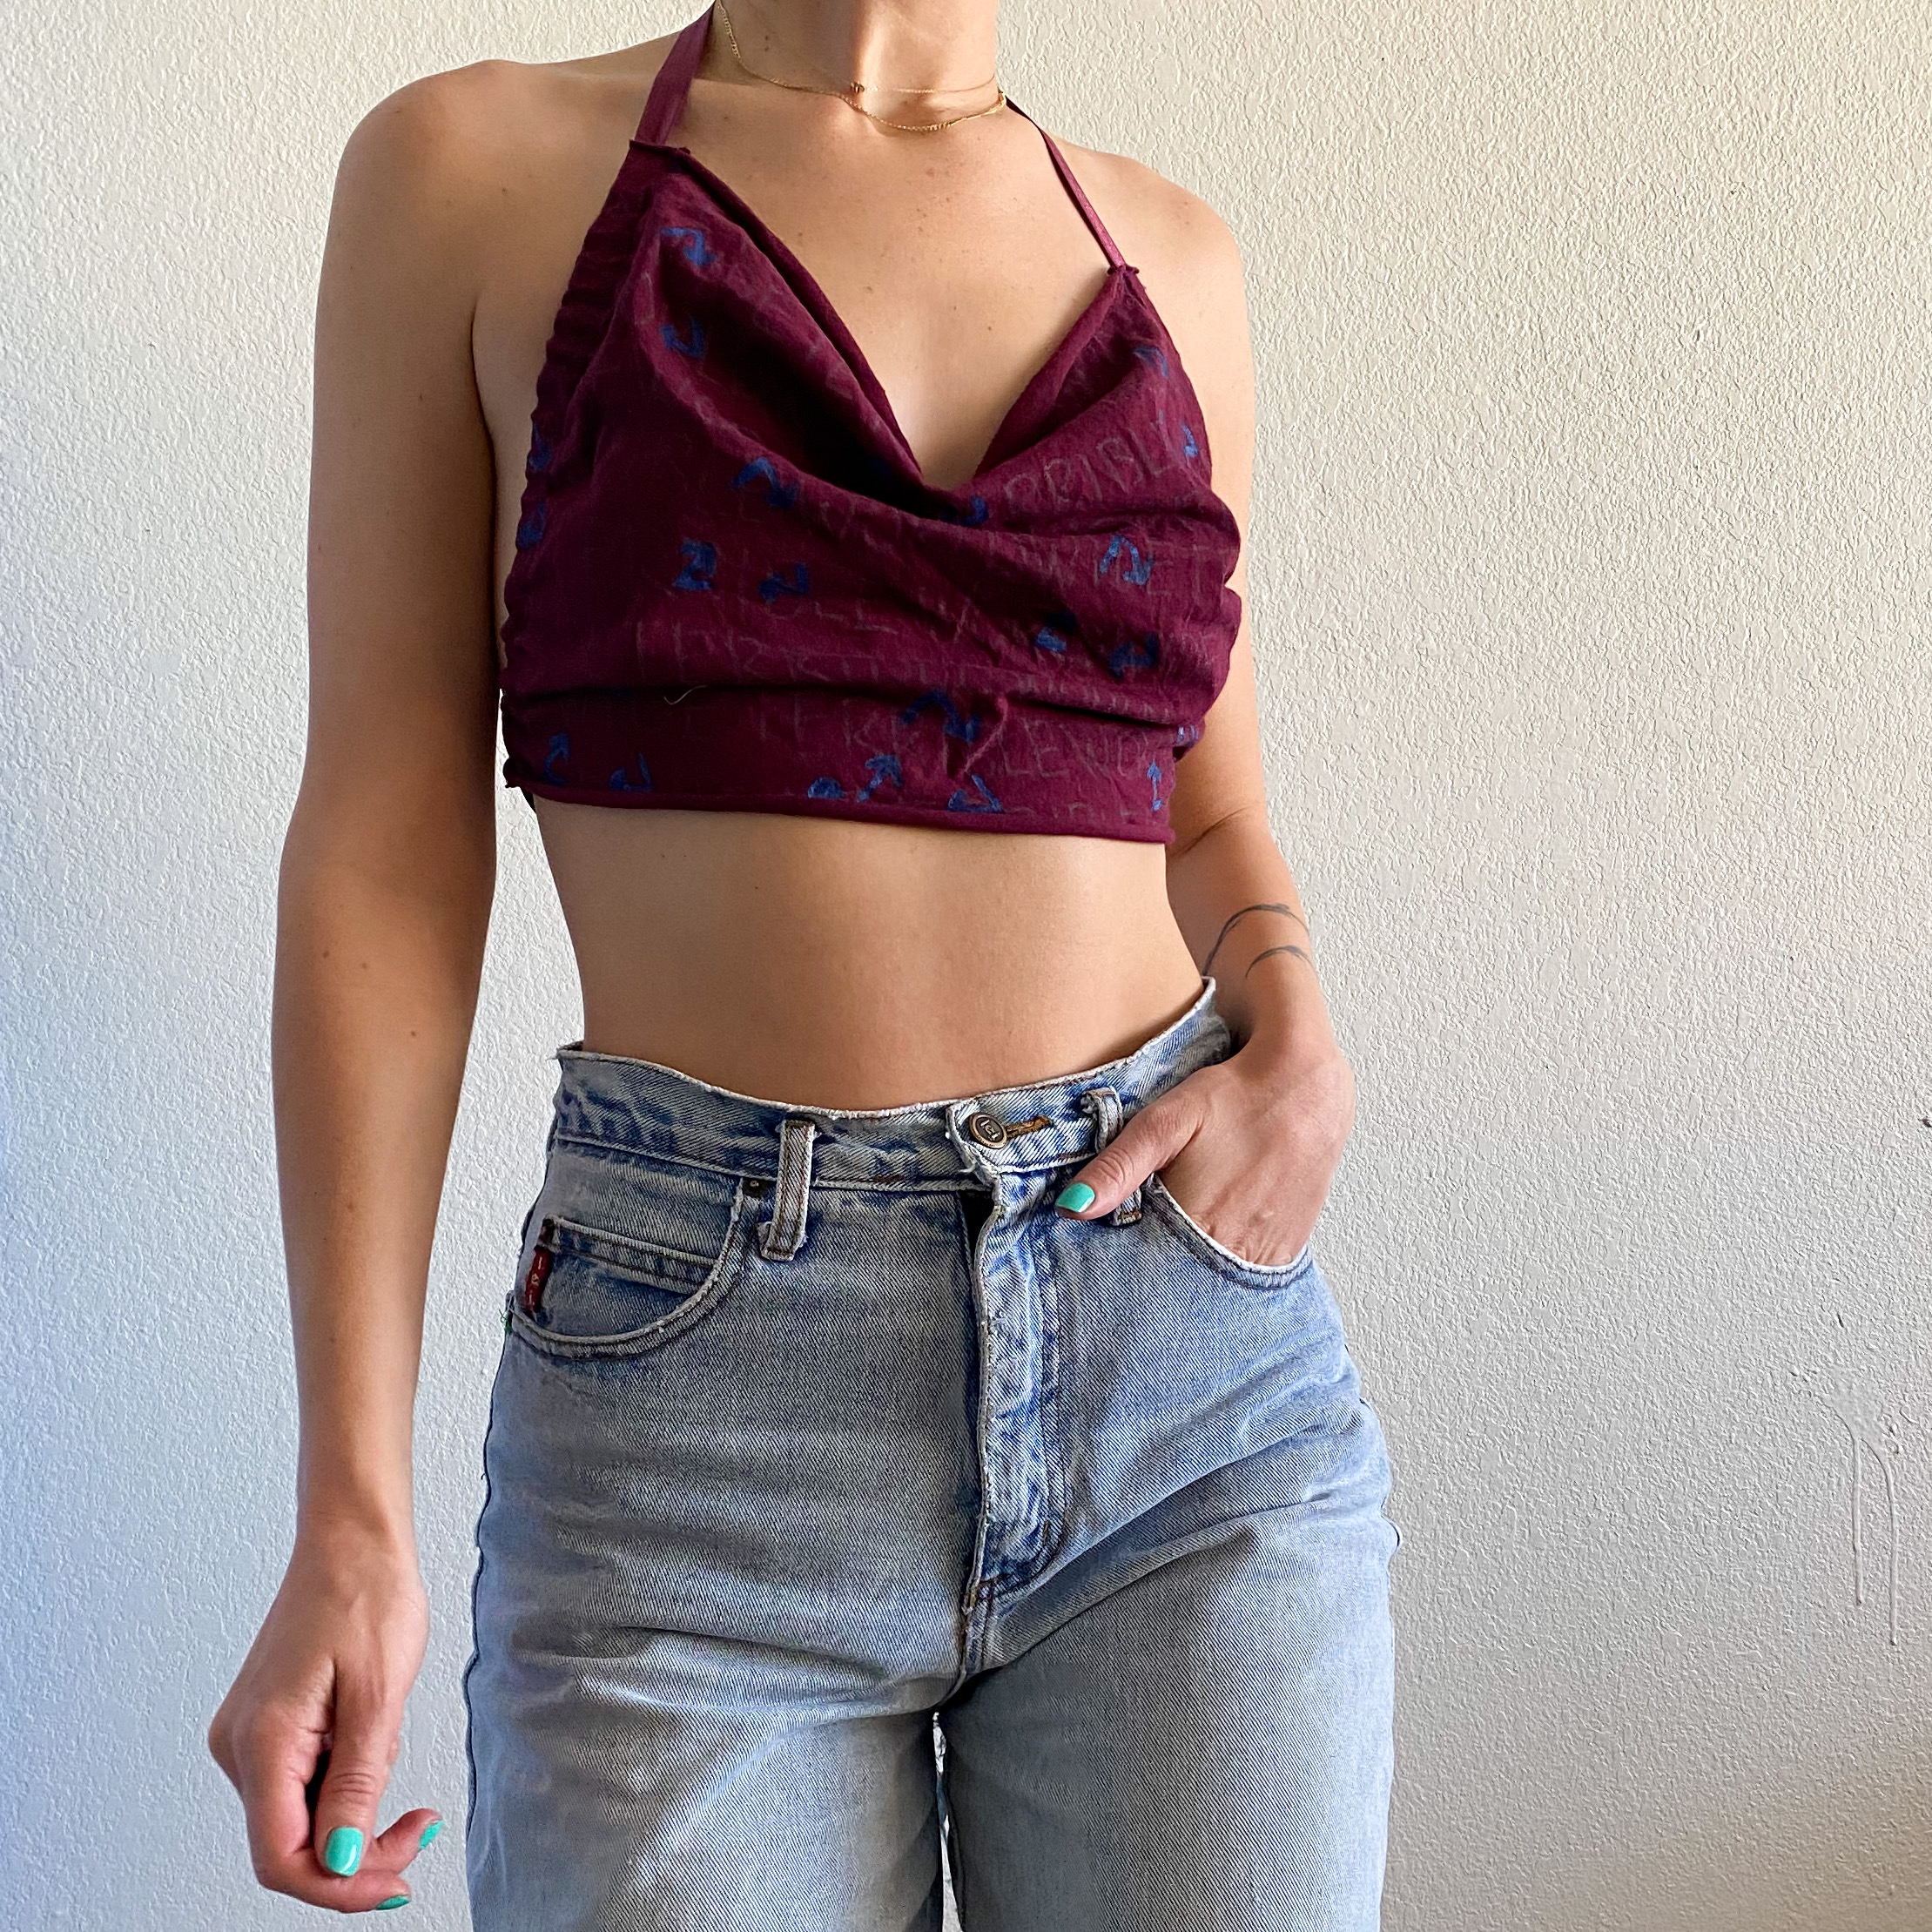 Uitverkoop melodie Geurig 1of1 painted text print maroon halter crop top | RE.STATEMENT | The  Upcycled Fashion Marketplace